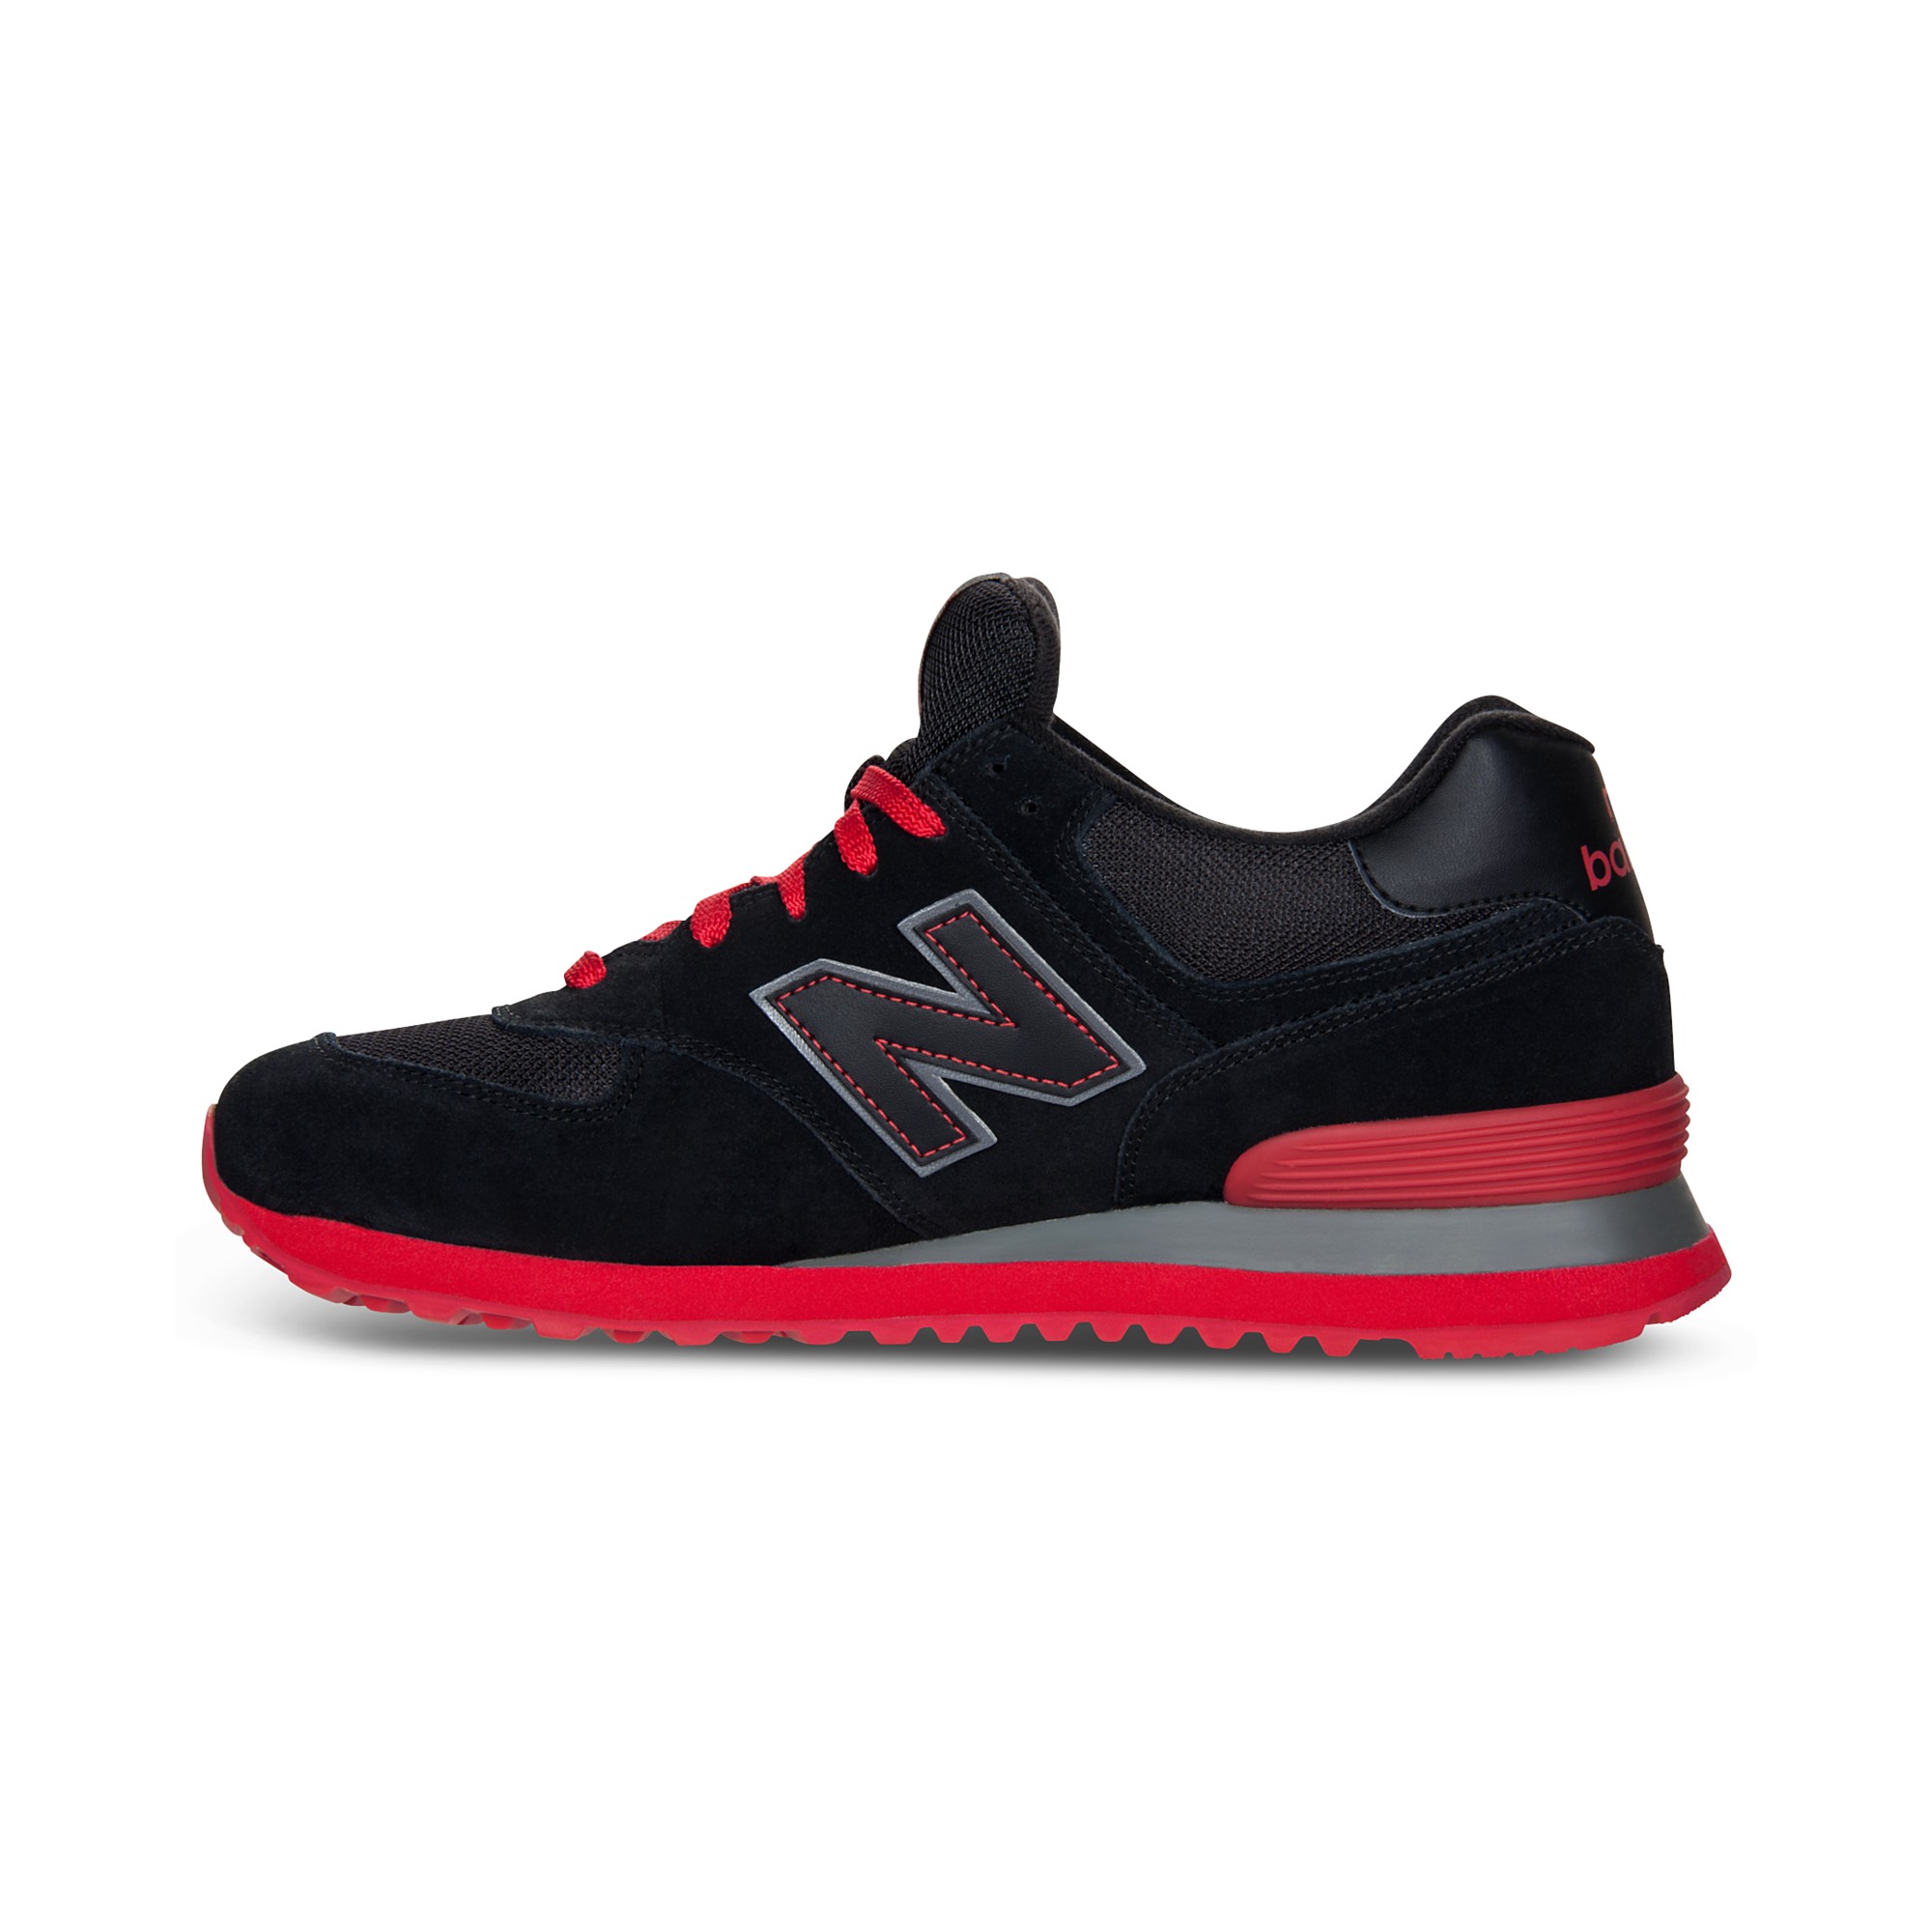 New Balance 574 Sneakers in Black/Red (Red) for Men - Lyst